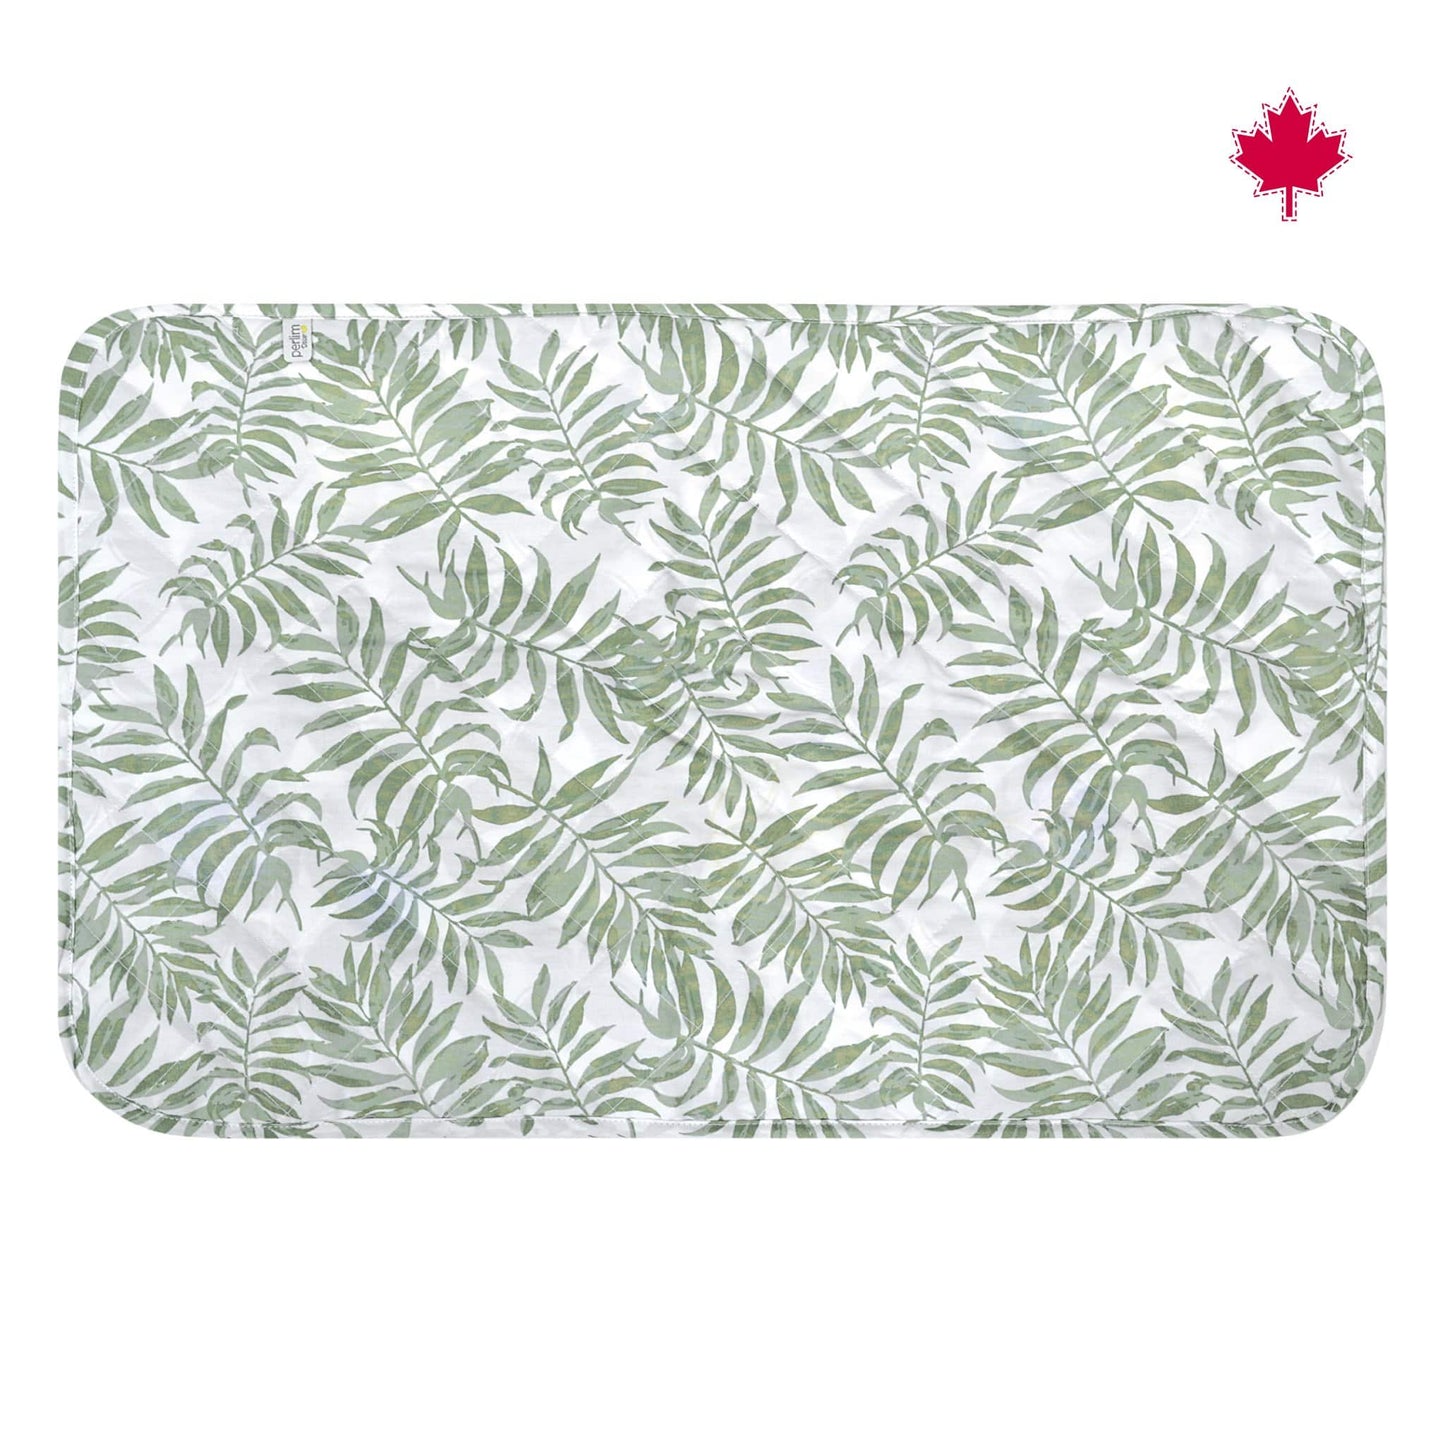 Waterproof Change Pad - Tropical Green (16x24 inches)